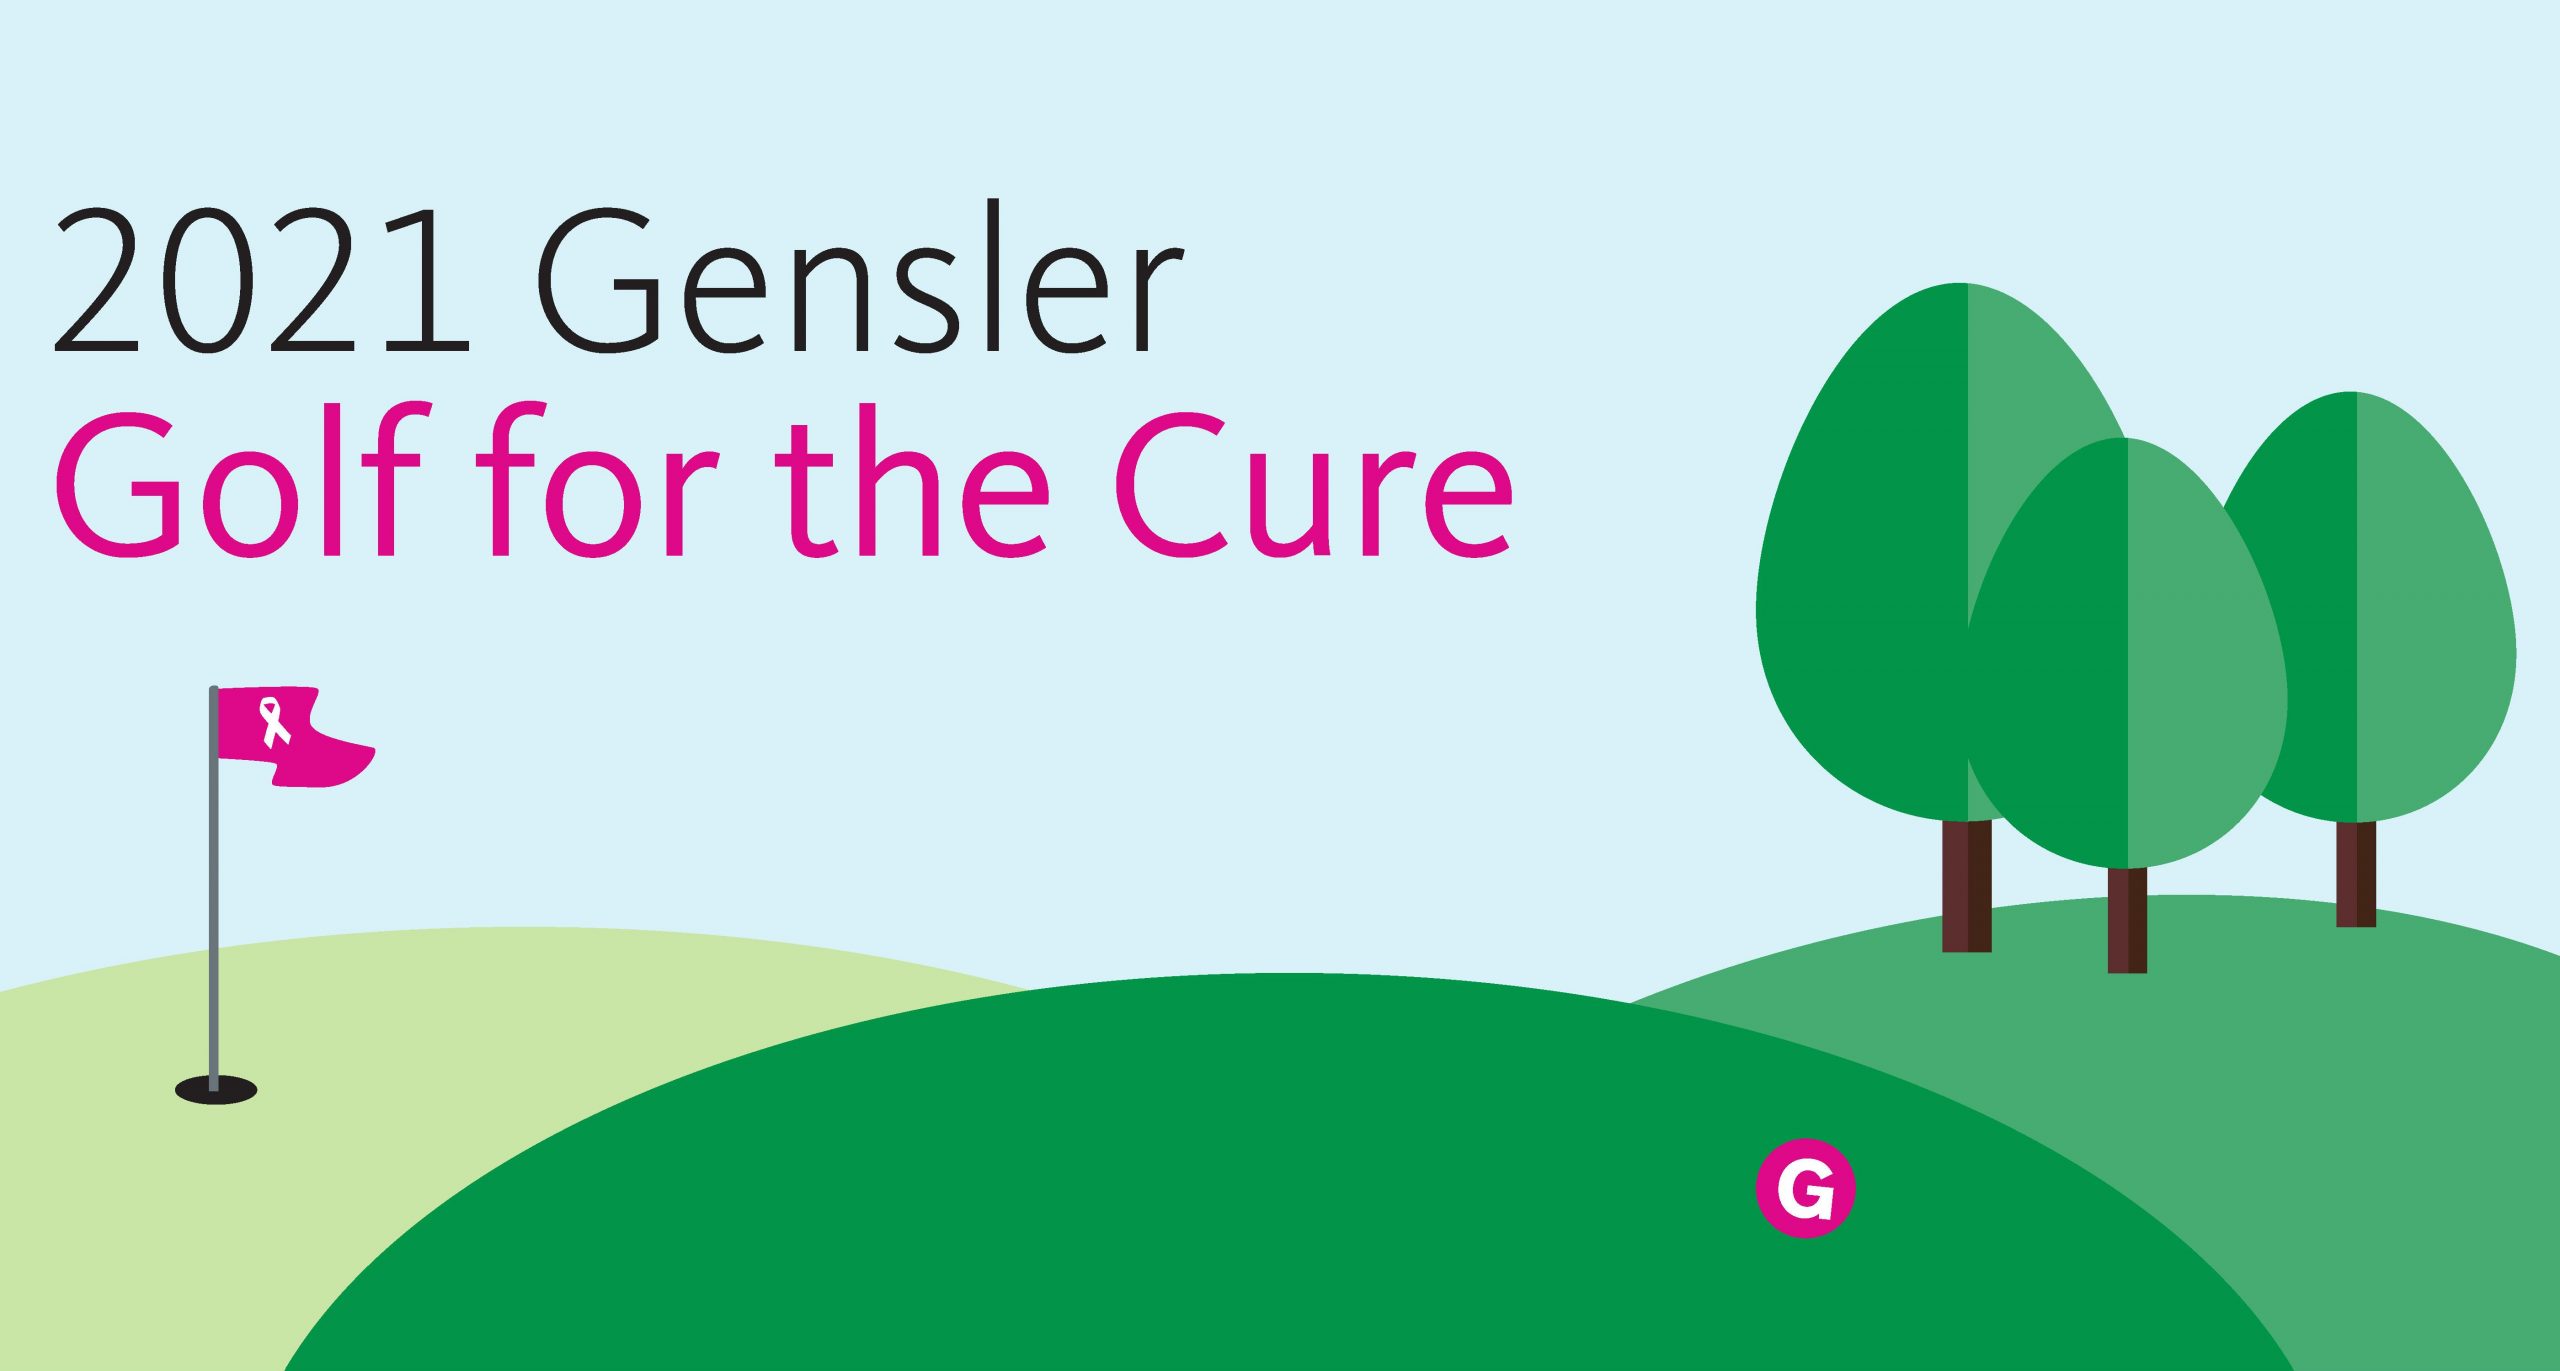 Gensler Golf for the Cure 2021